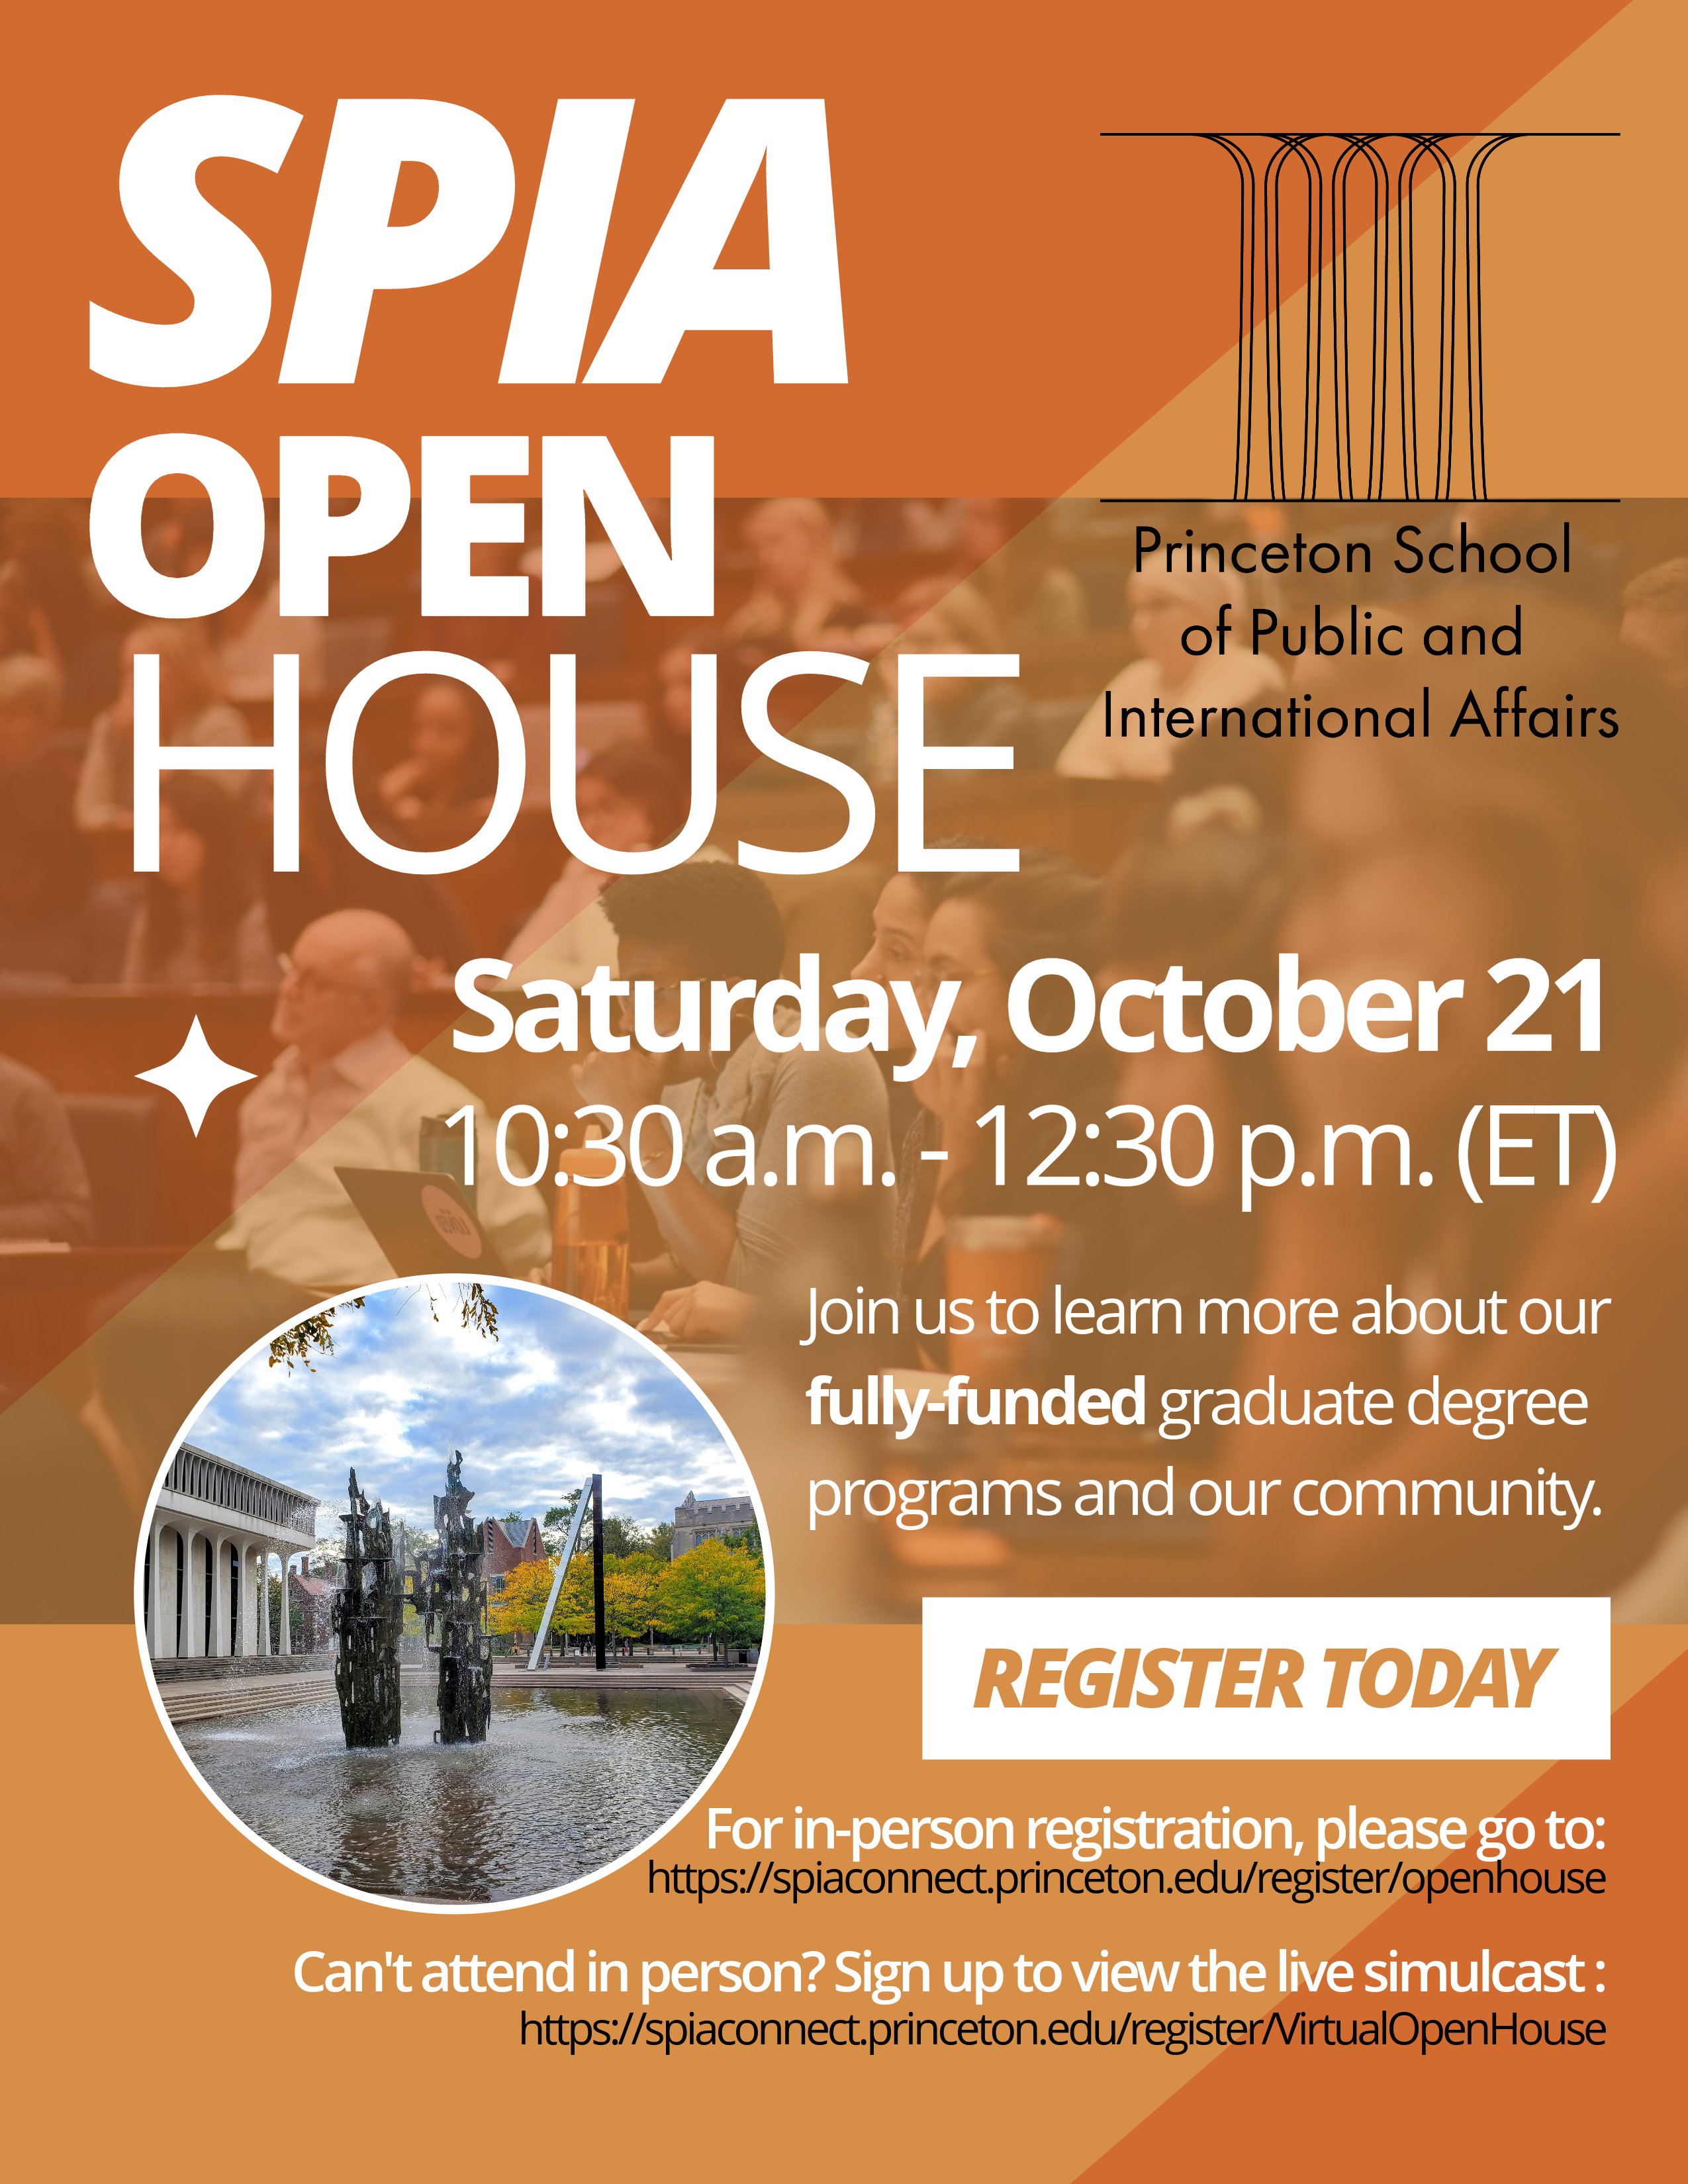 Open House Saturday, October 21